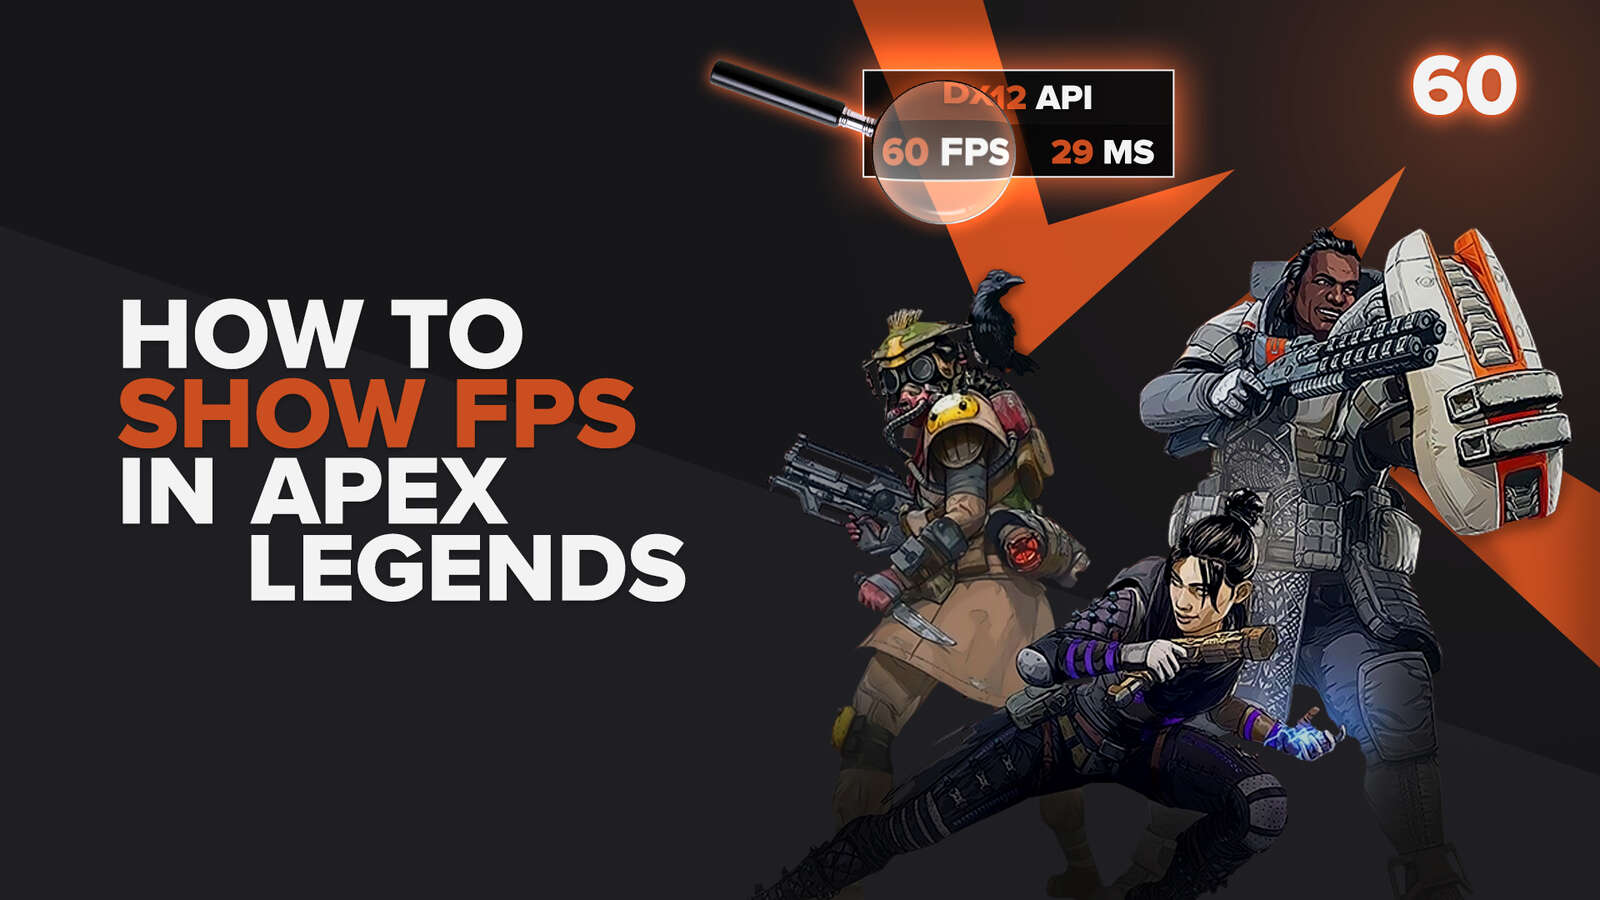 How To Show FPS in Apex Legends In A Few Clicks